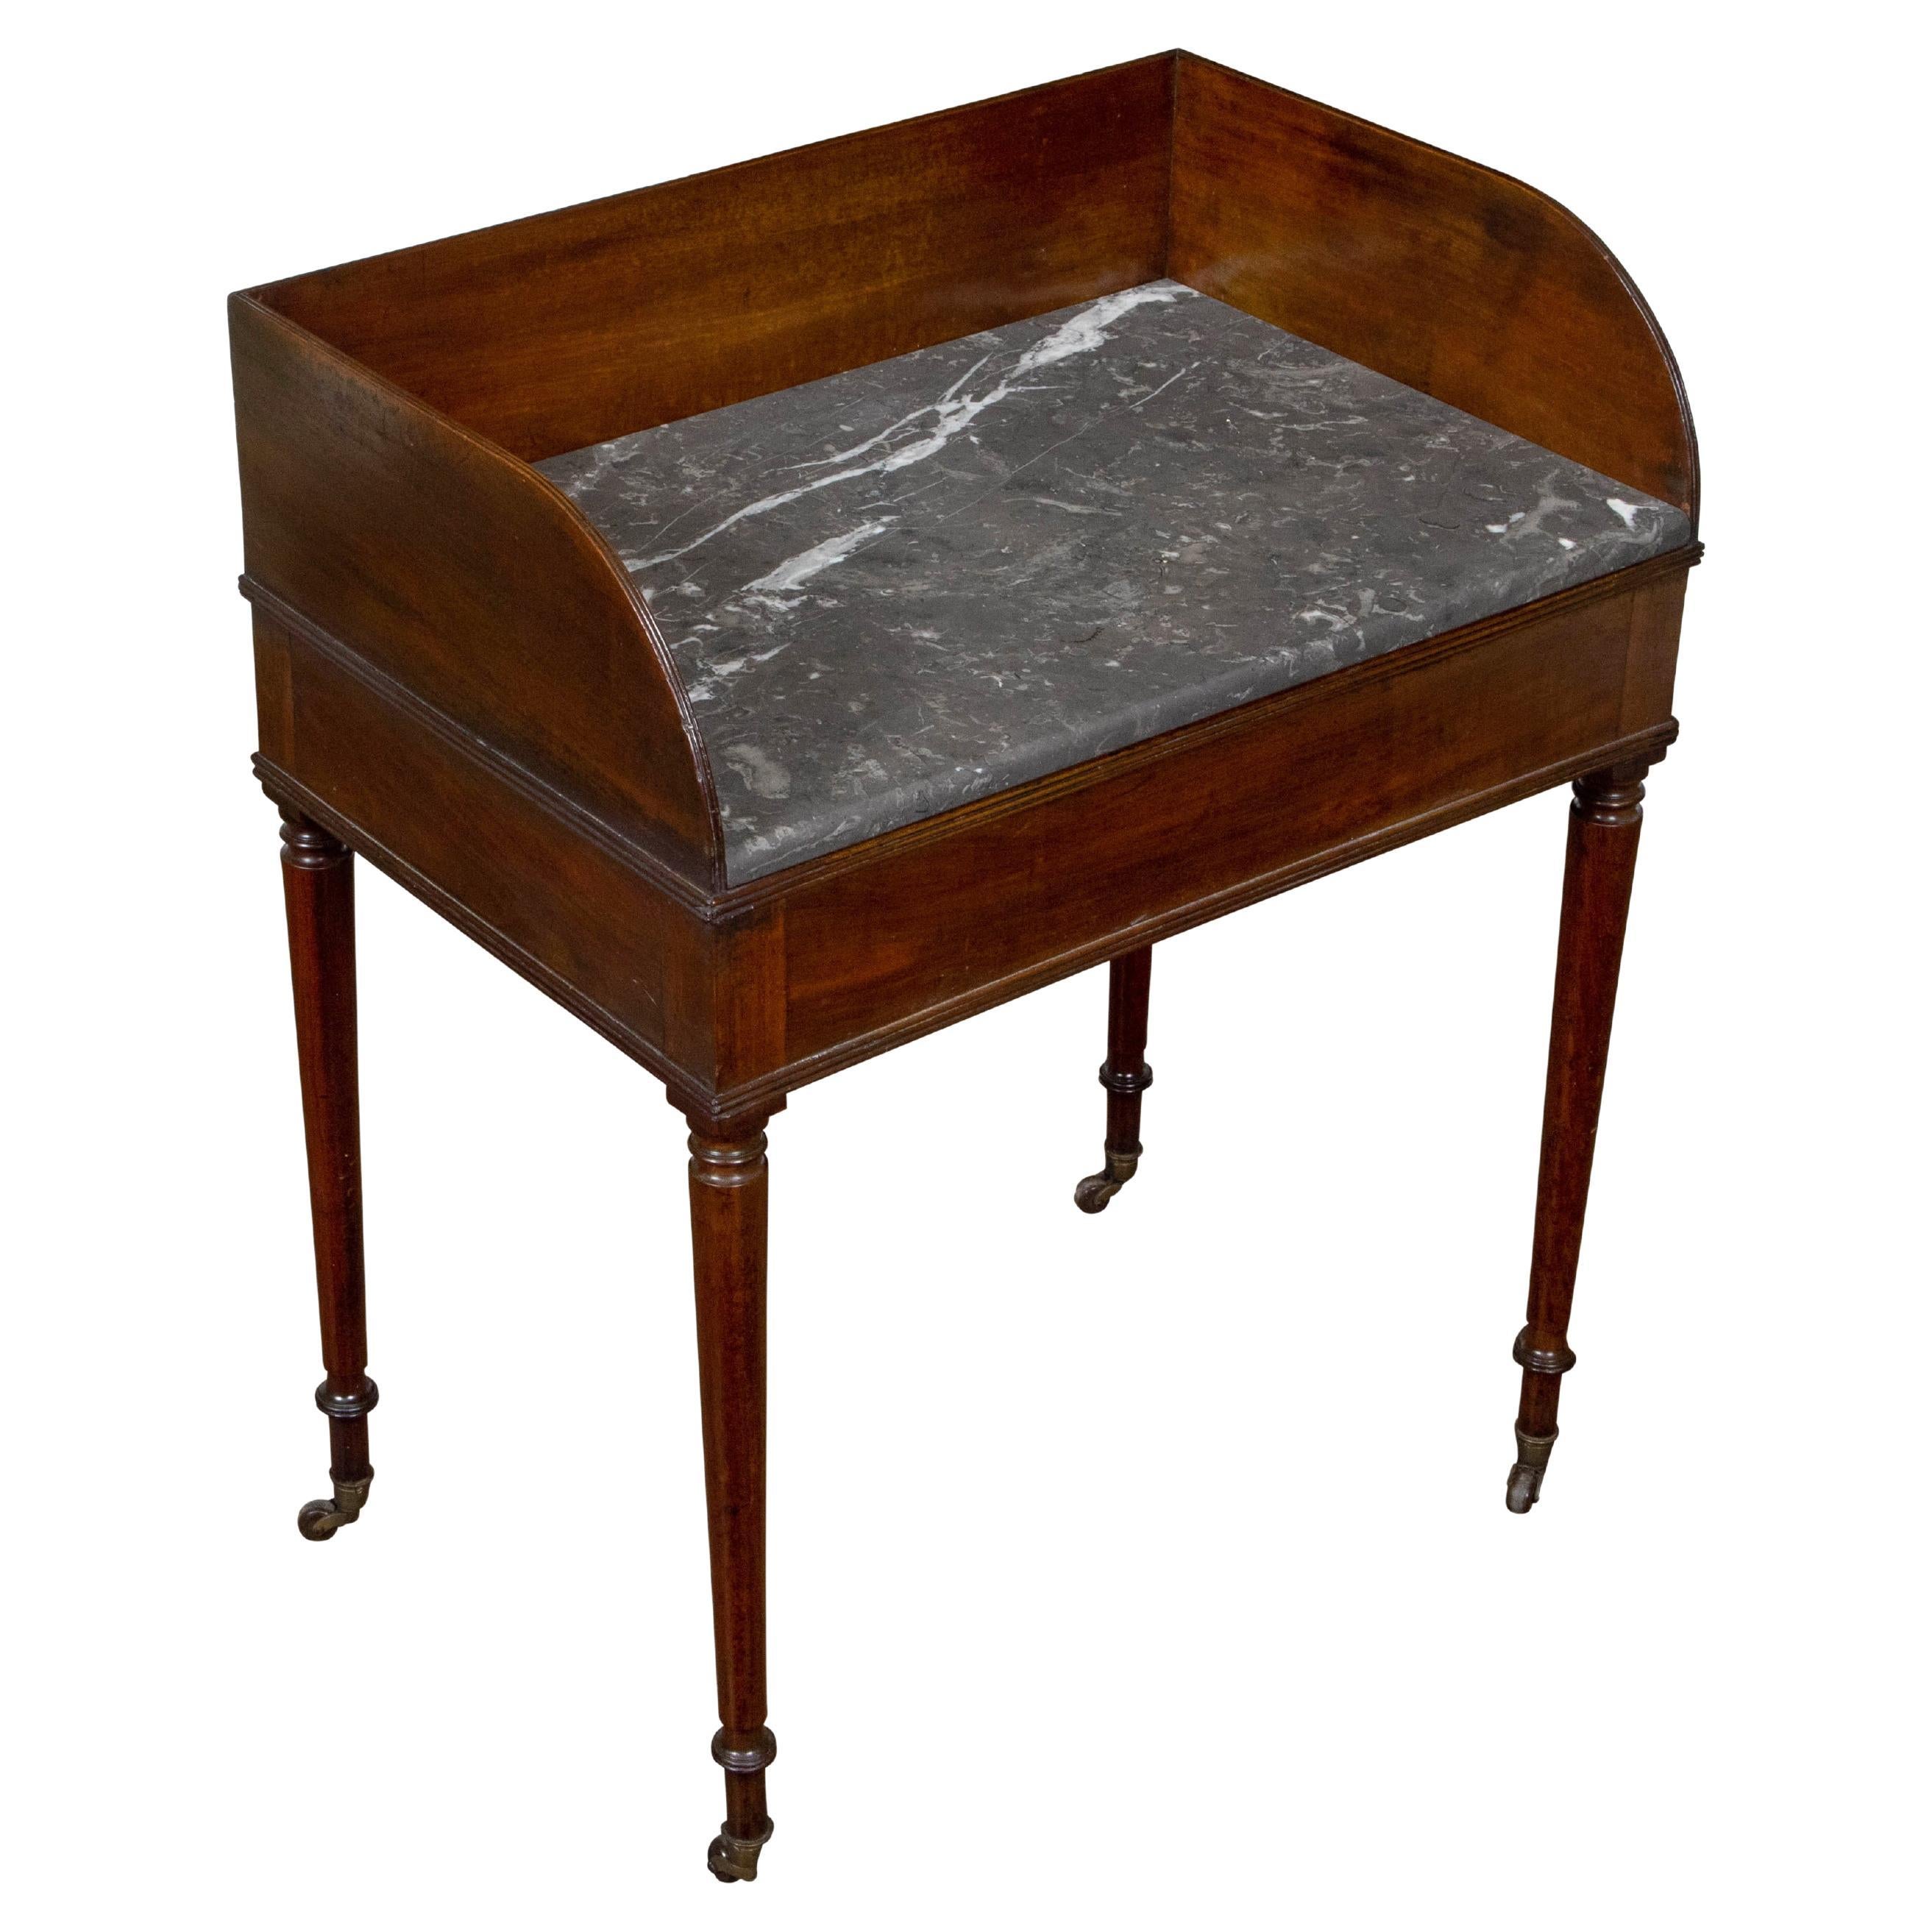 English Mahogany 1840s Washstand Table with Grey Marble Top on Casters